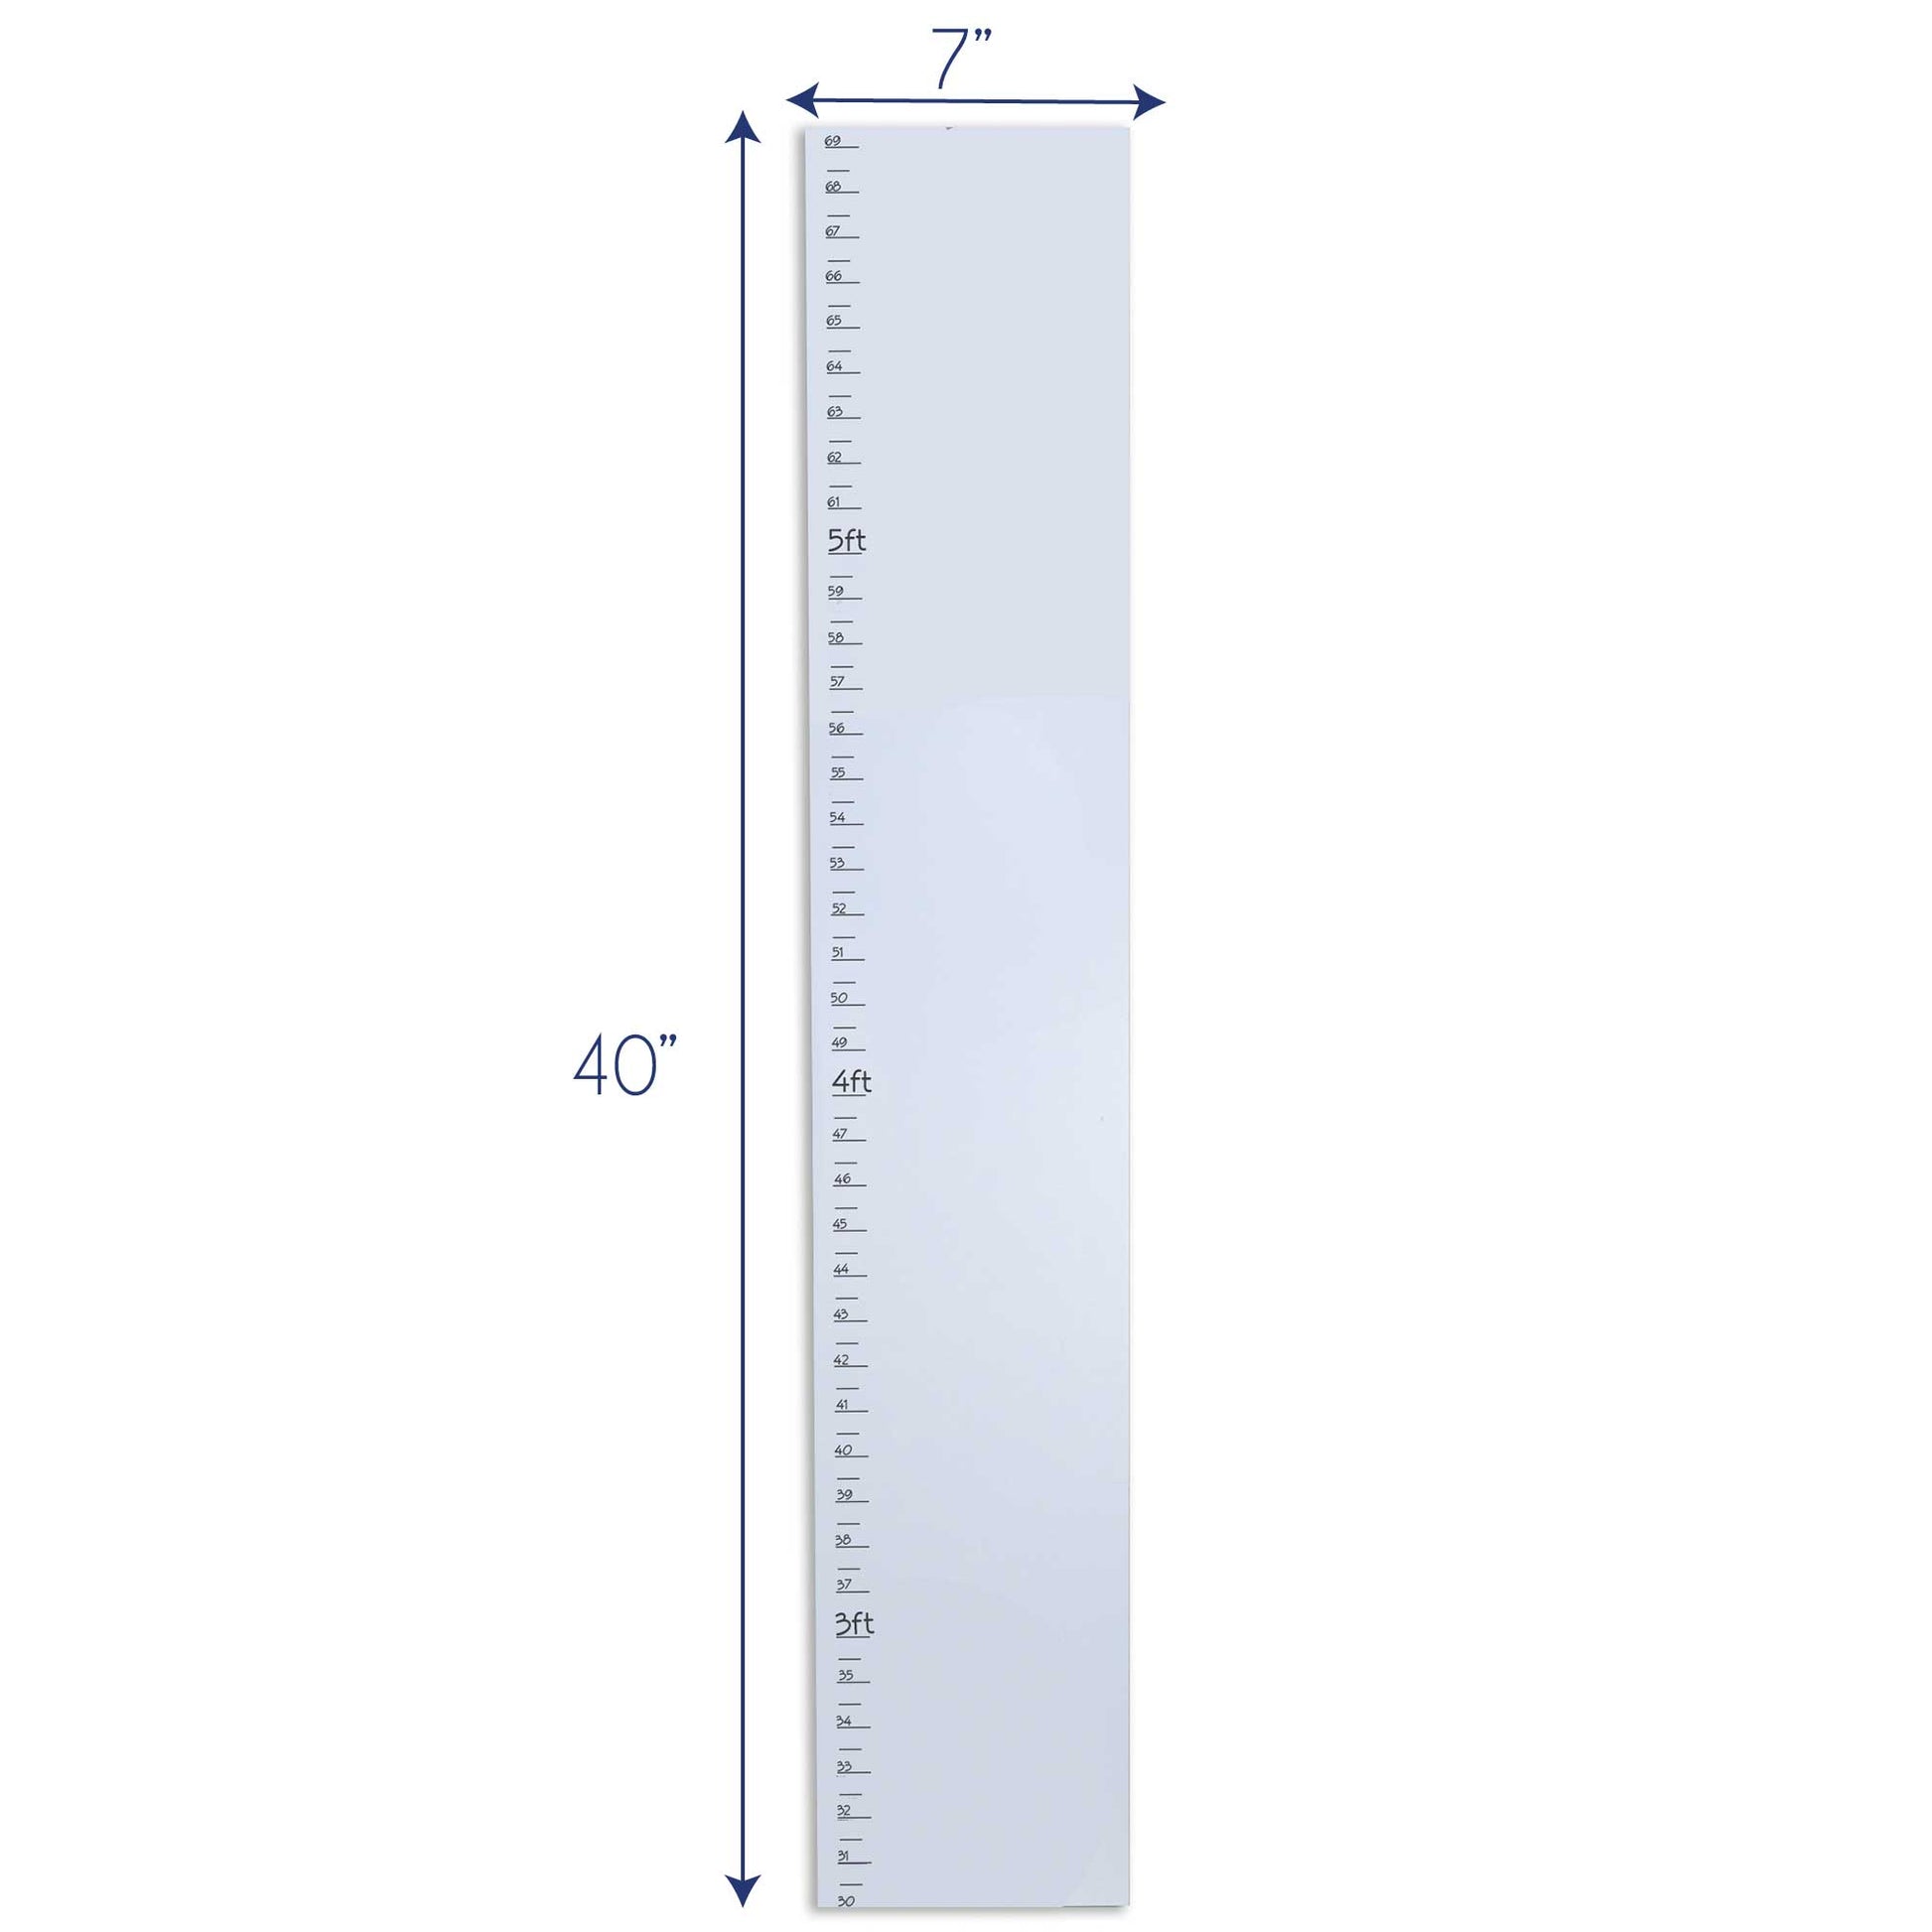 Personalized White Growth Chart With Lacrosse Design